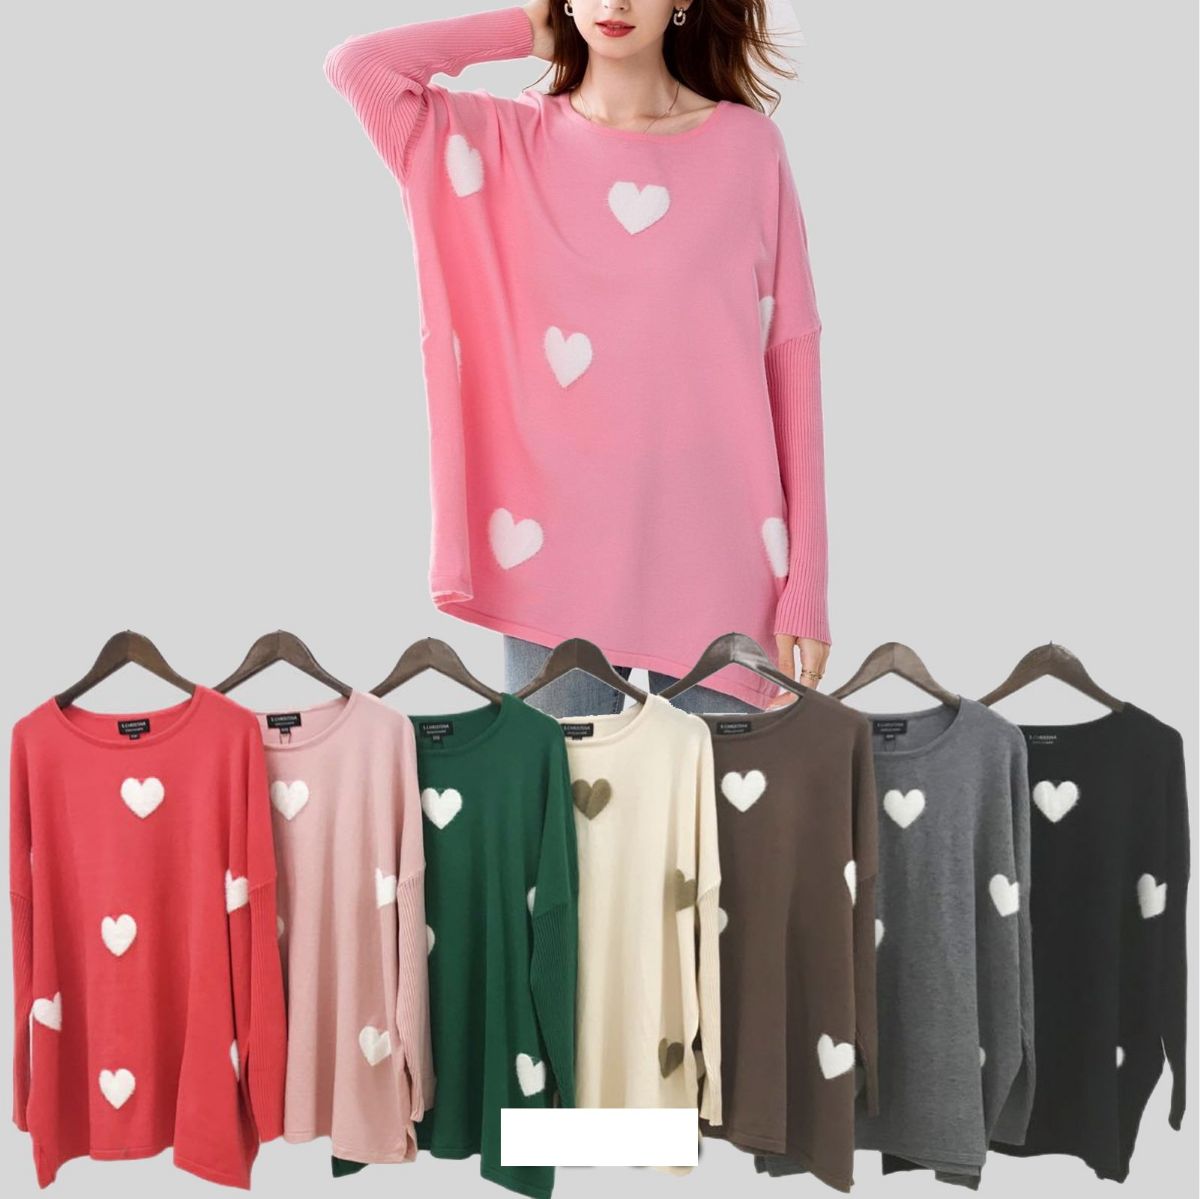 12 Pieces of Knitted Cashmere Baggy Sweater Hearts Design L/xl